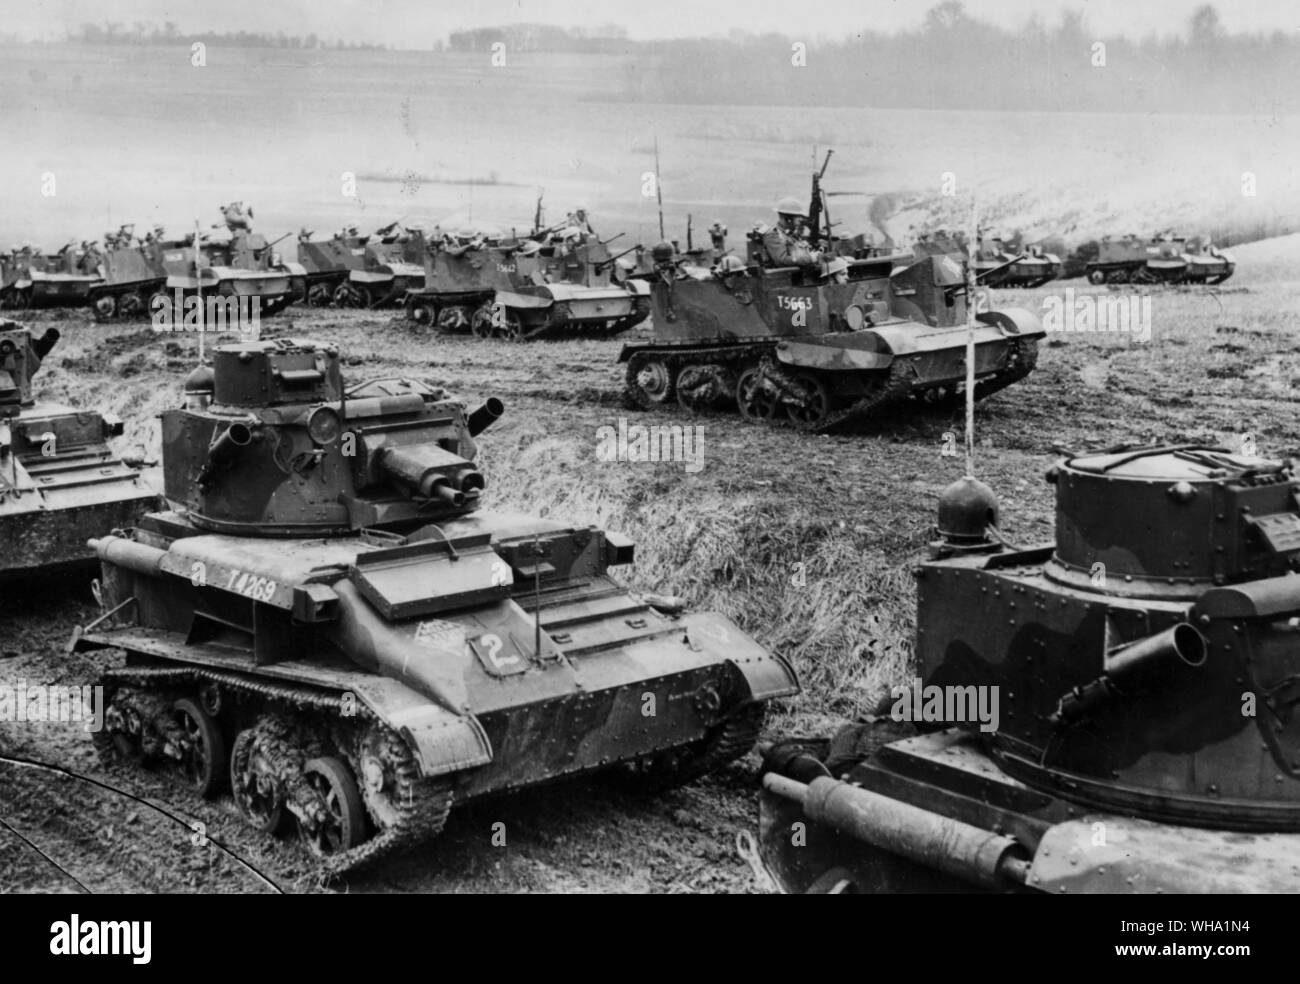 WW2: Tanks in training in France. An exercise with a mechanised cavalry regiment at Funvillers, 19th March 1940. Tanks move forward. Stock Photo